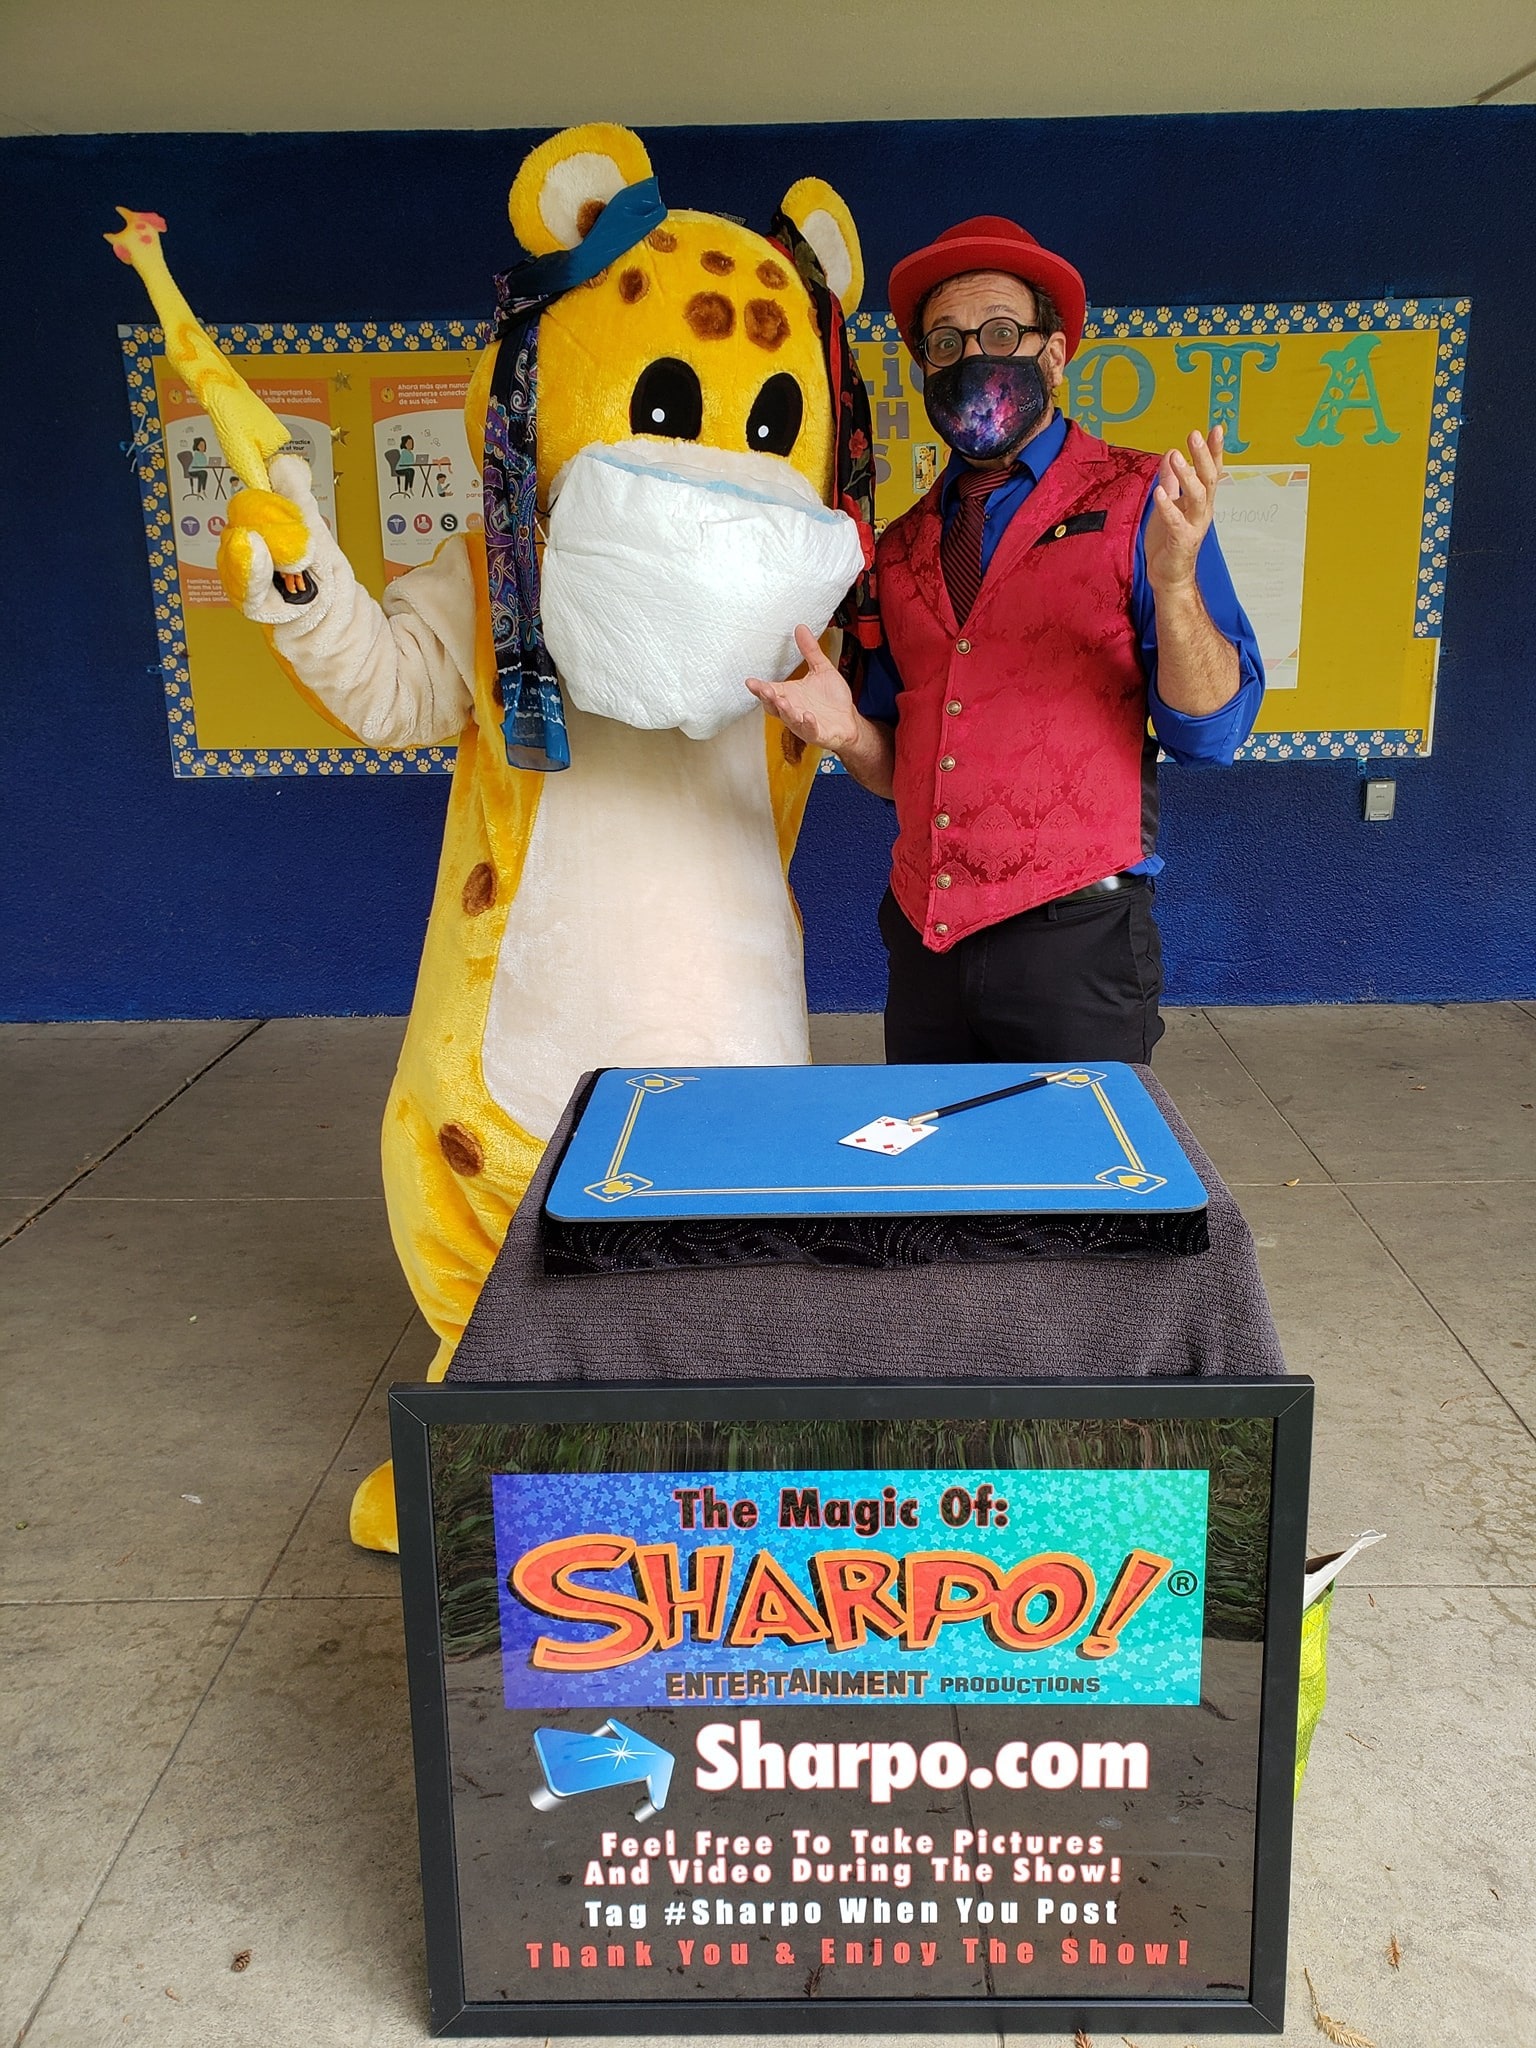 Sharpo!® entertaining magic for kids!  Posing here with a school mascot.